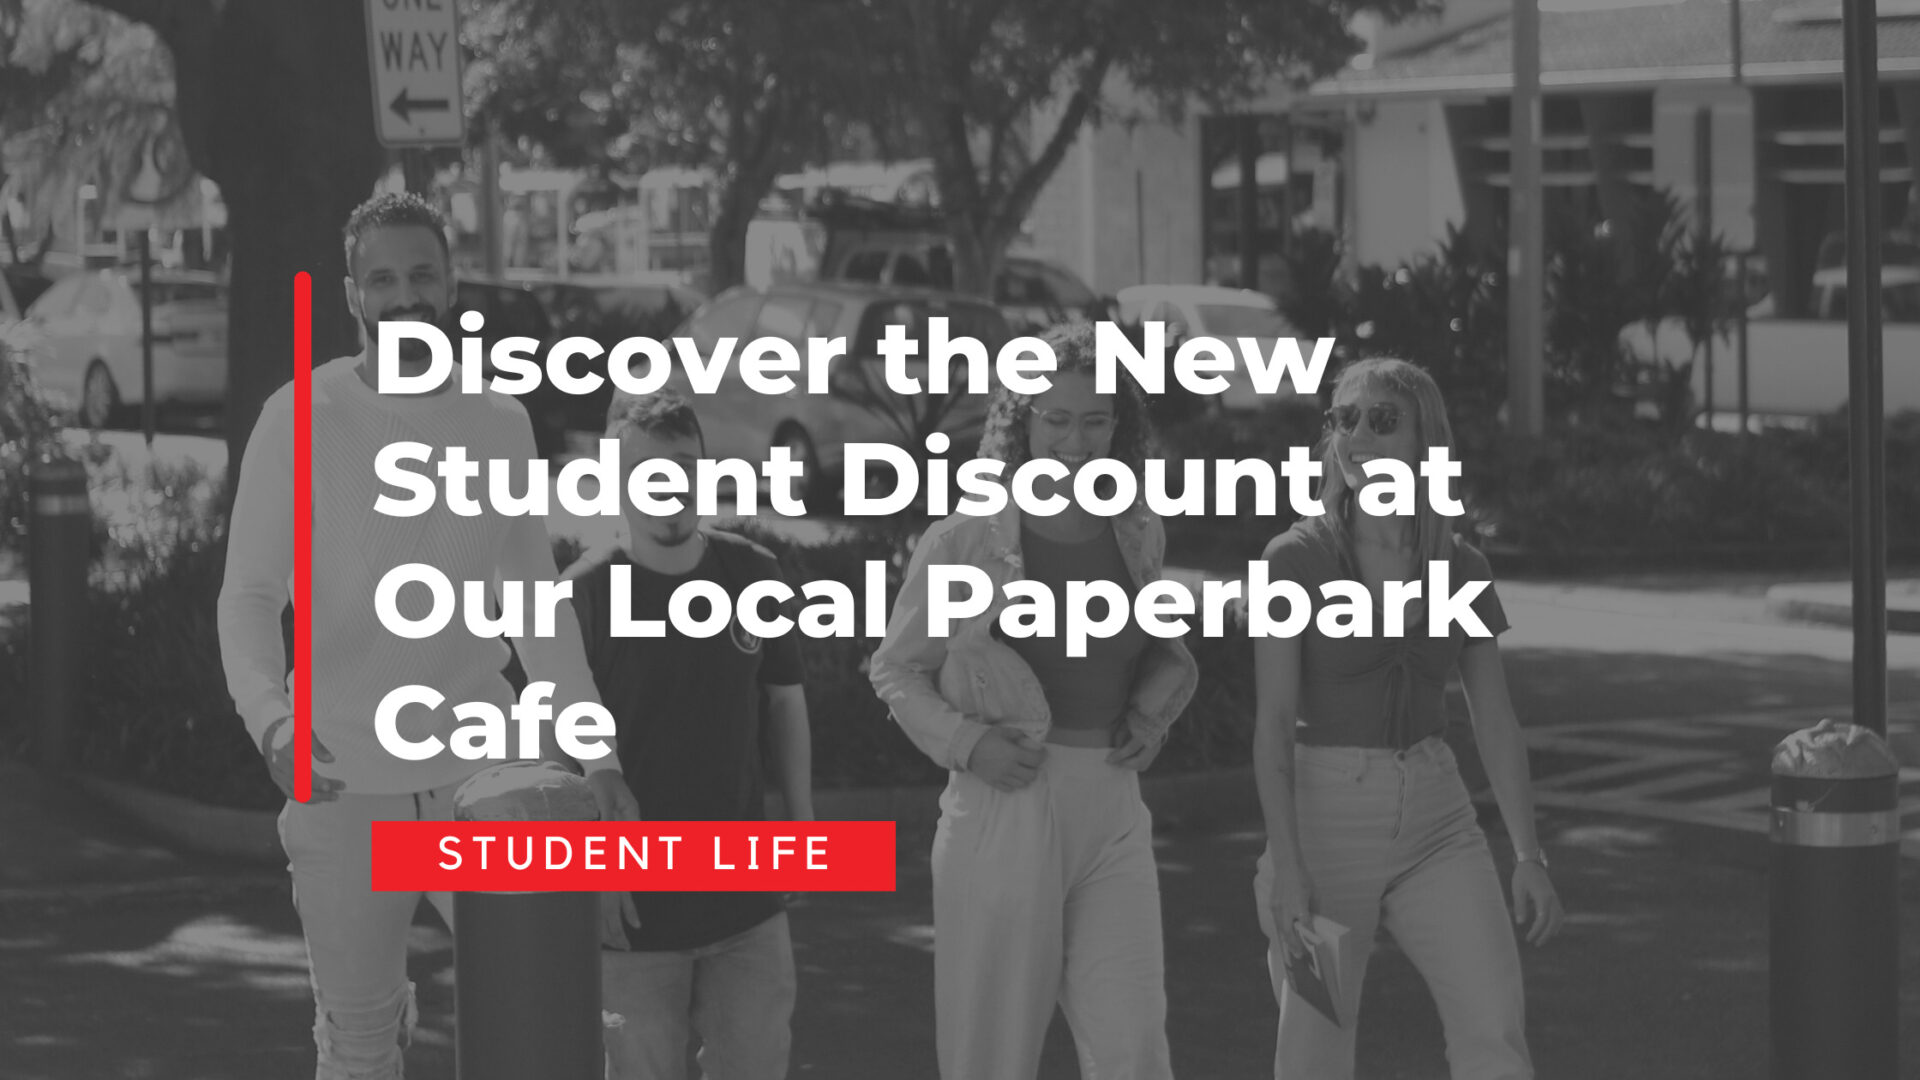 Discover the New Student Discount at Our Local Paperbark Cafe